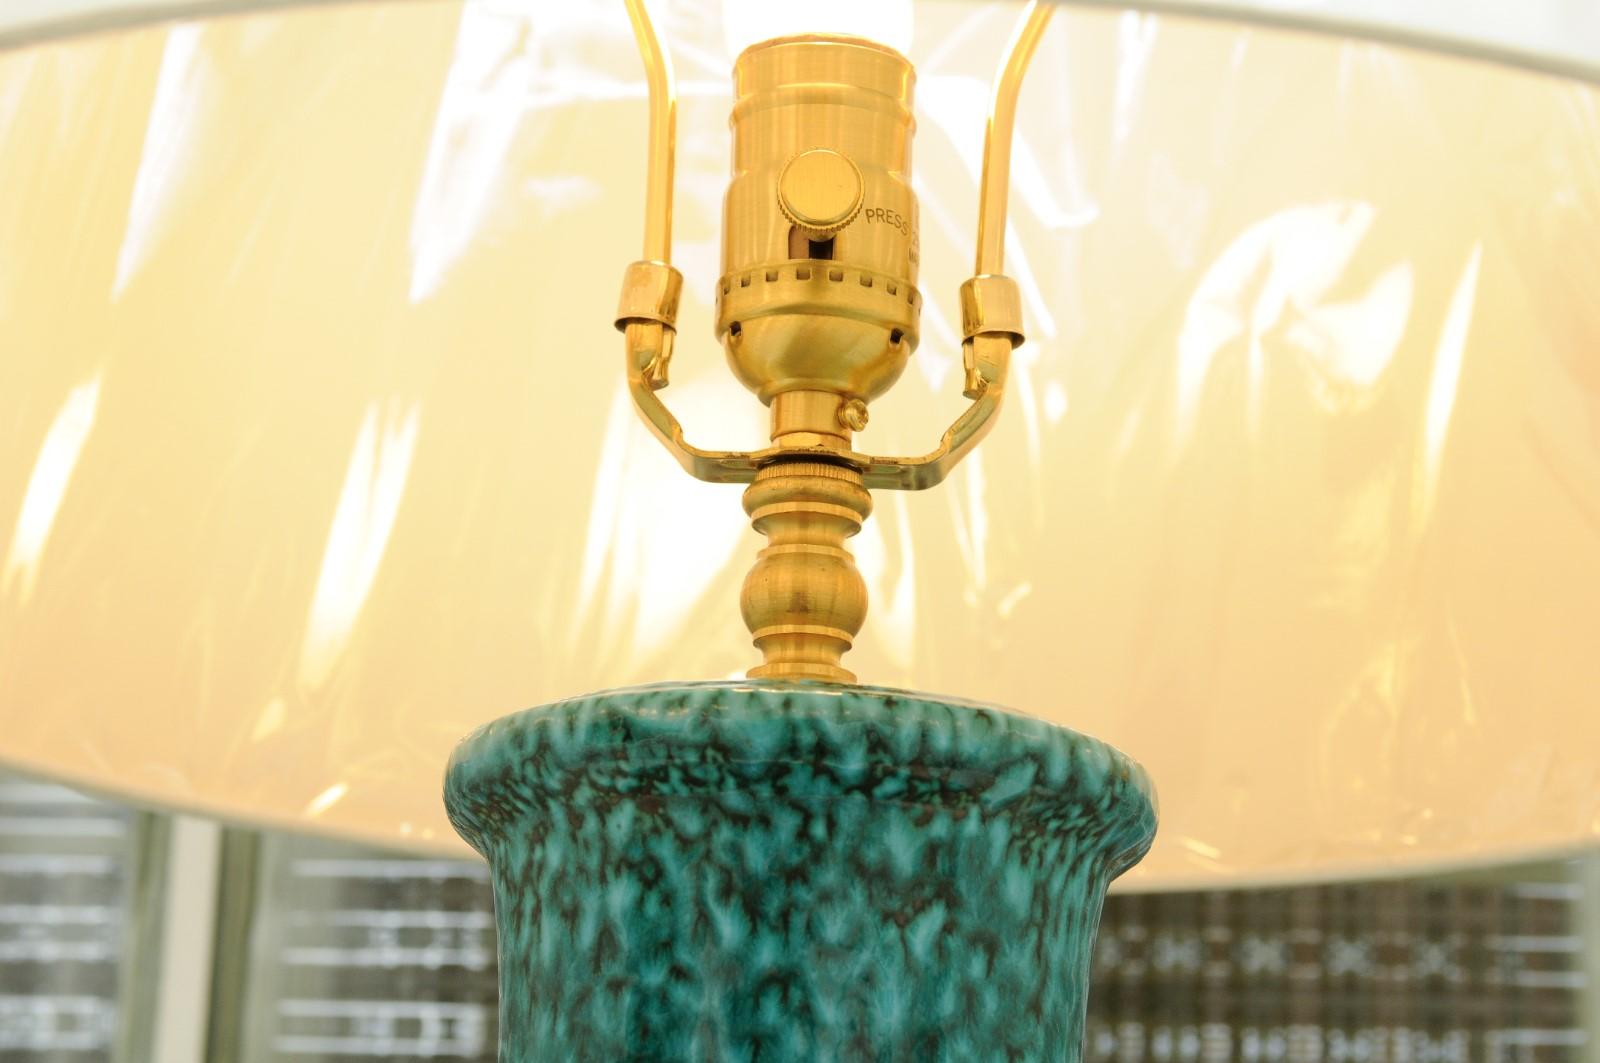 Exceptional Pair of Restored Italian Ceramic Lamps in Turquoise, circa 1960 For Sale 4